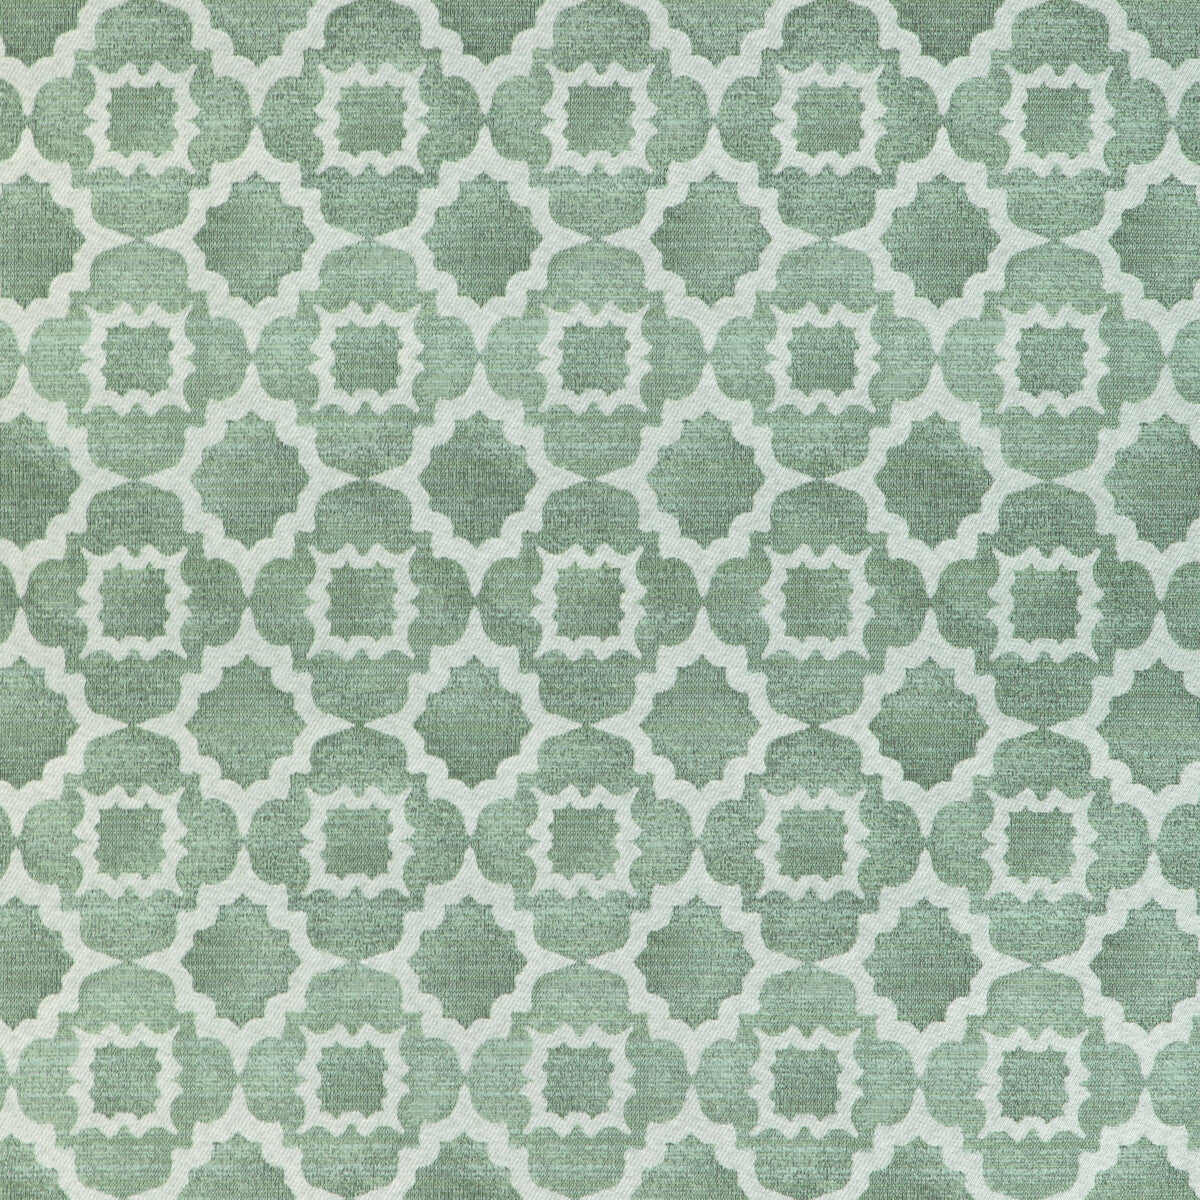 Potomac fabric in jade color - pattern 37075.31.0 - by Kravet Contract in the Chesapeake collection